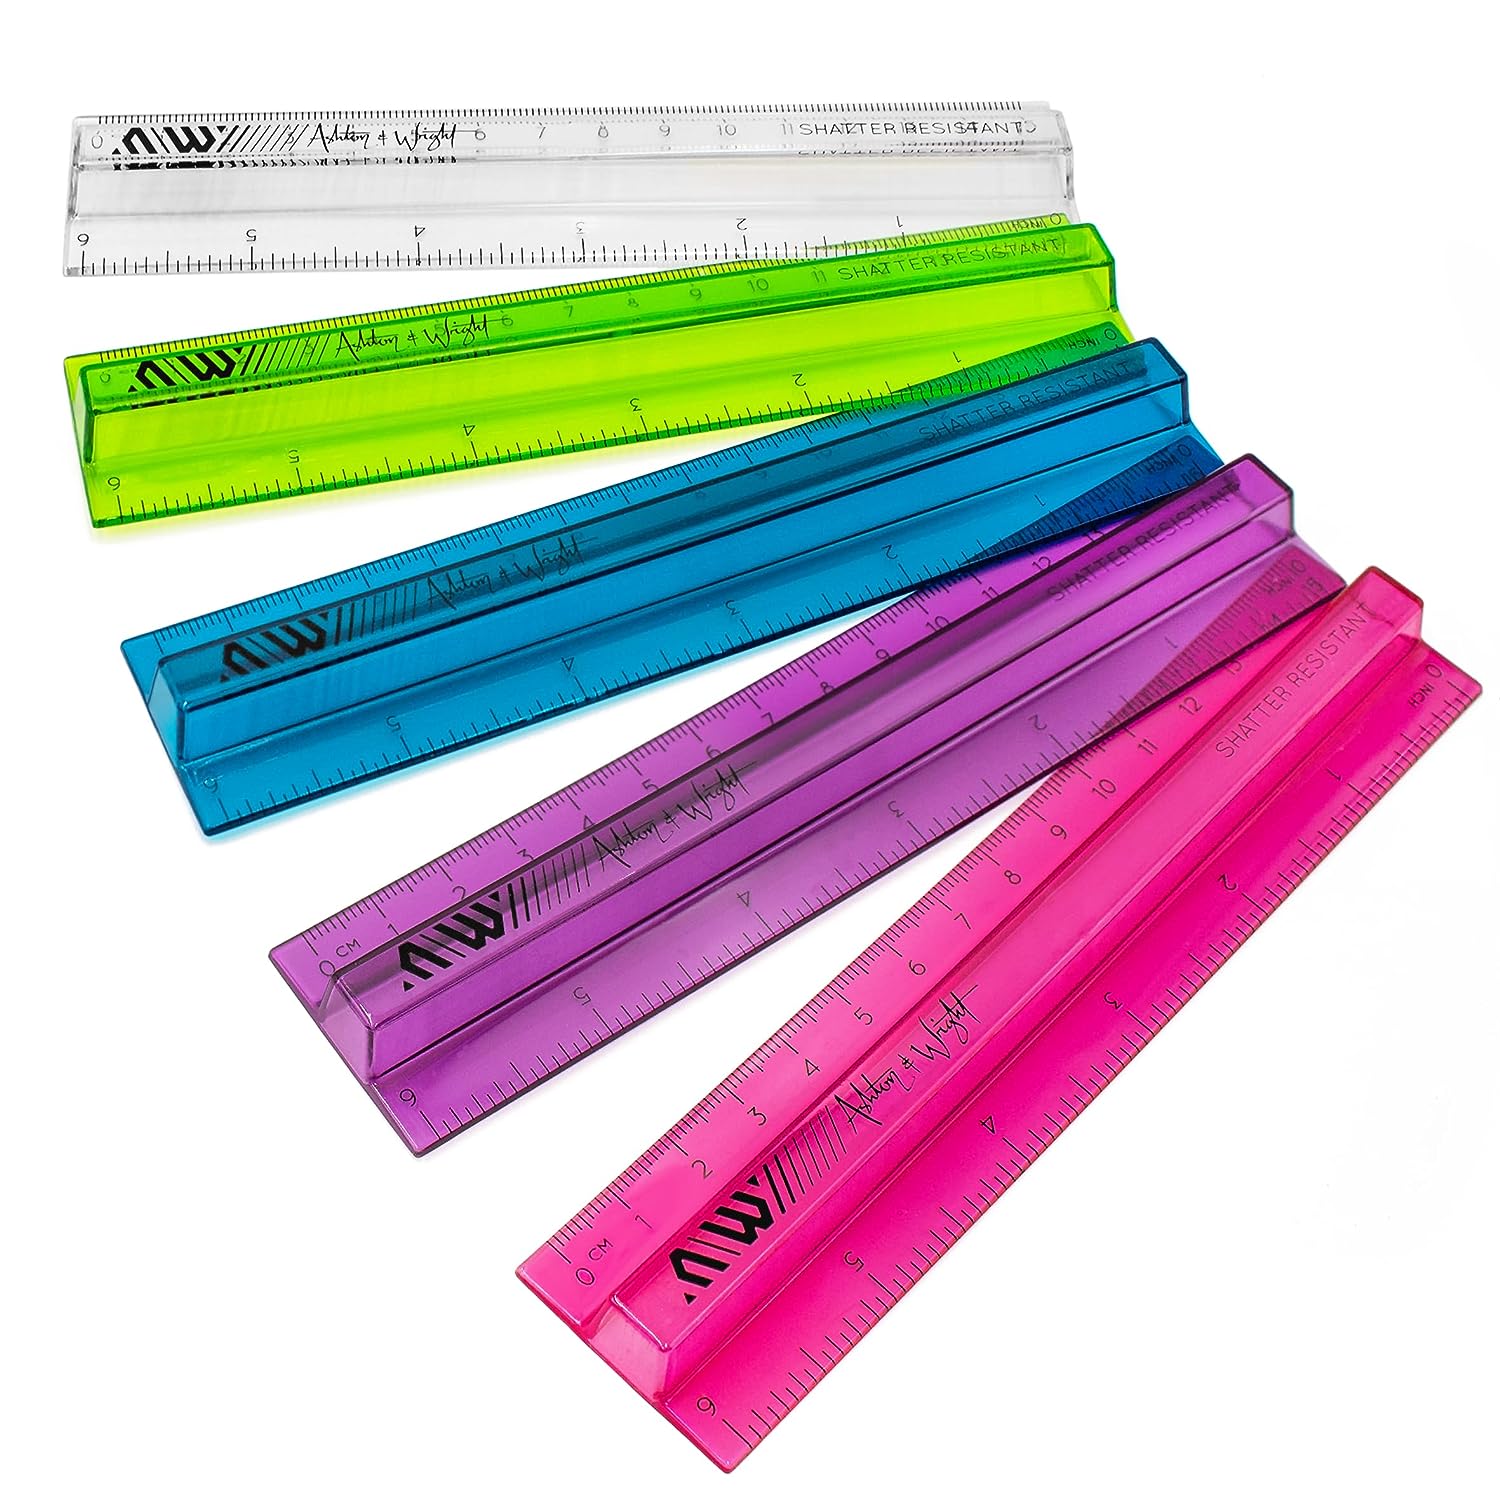 Shatter Resistant Raised Rulers - 6 Inch / 15cm